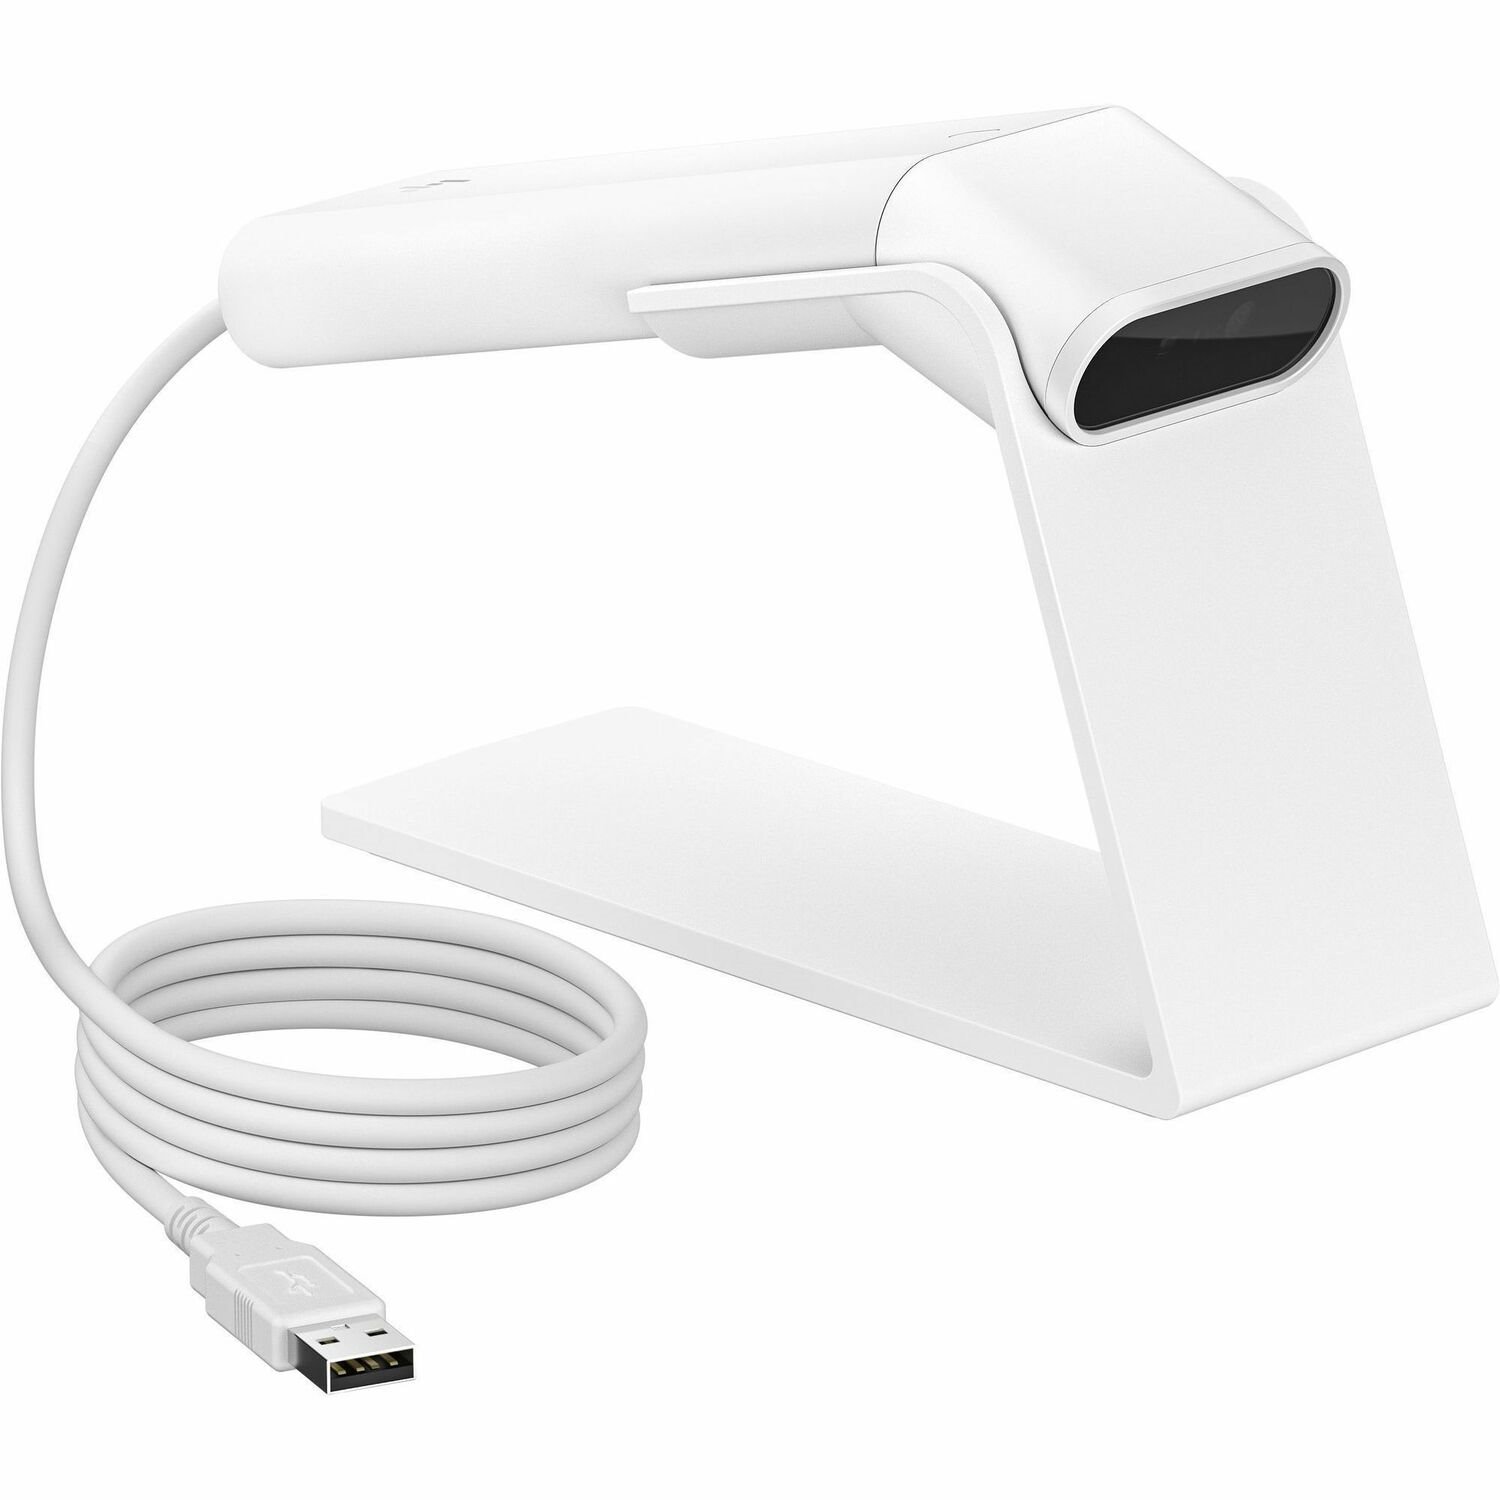 HP Engage 6Y2V5AA Handheld Barcode Scanner - Cable Connectivity - White, Ceramic White